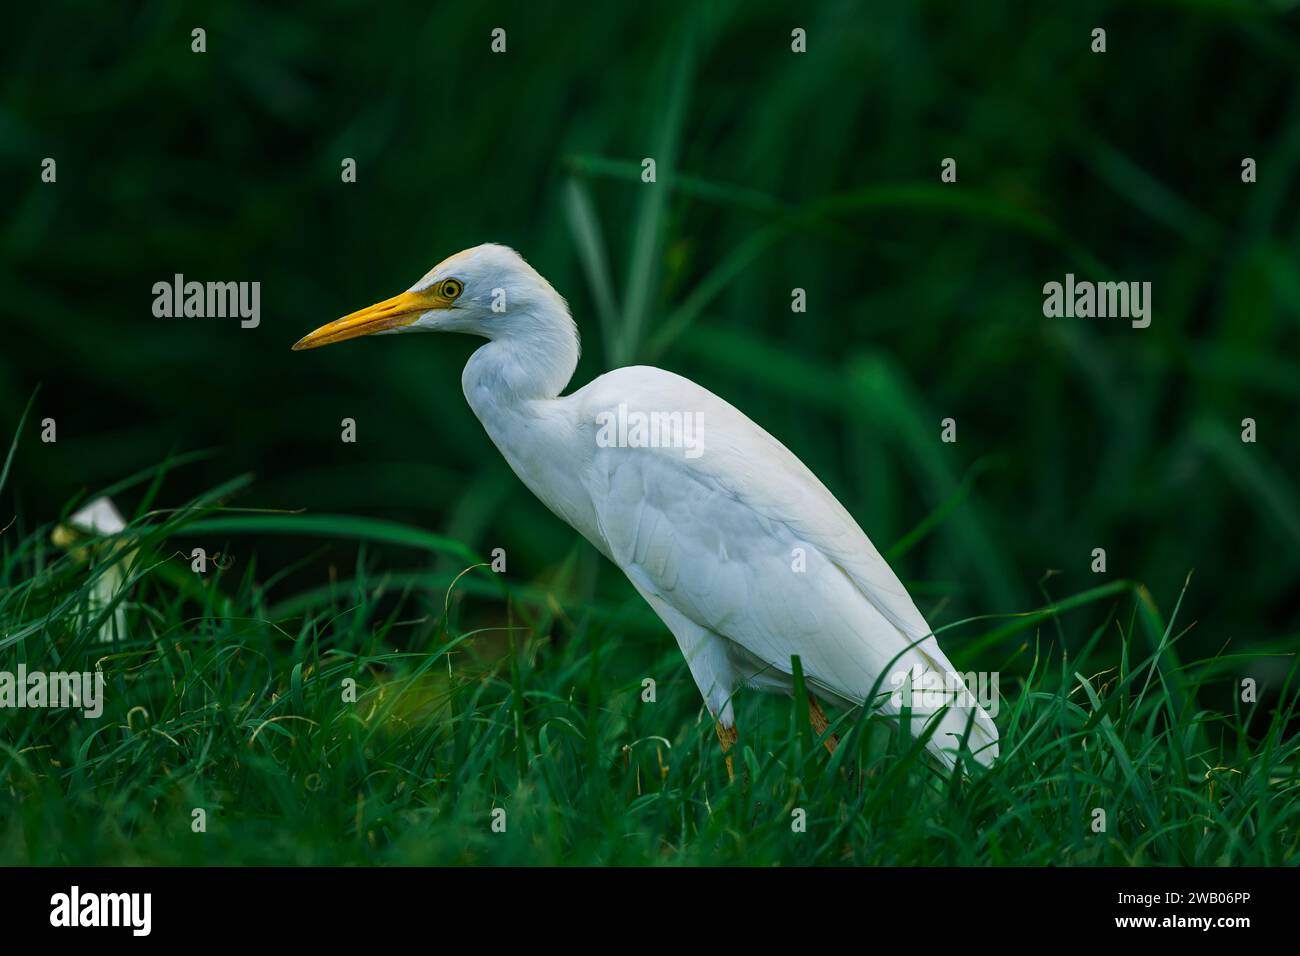 A majestic white Egret bird with a bright yellow beak stands in a lush green field Stock Photo